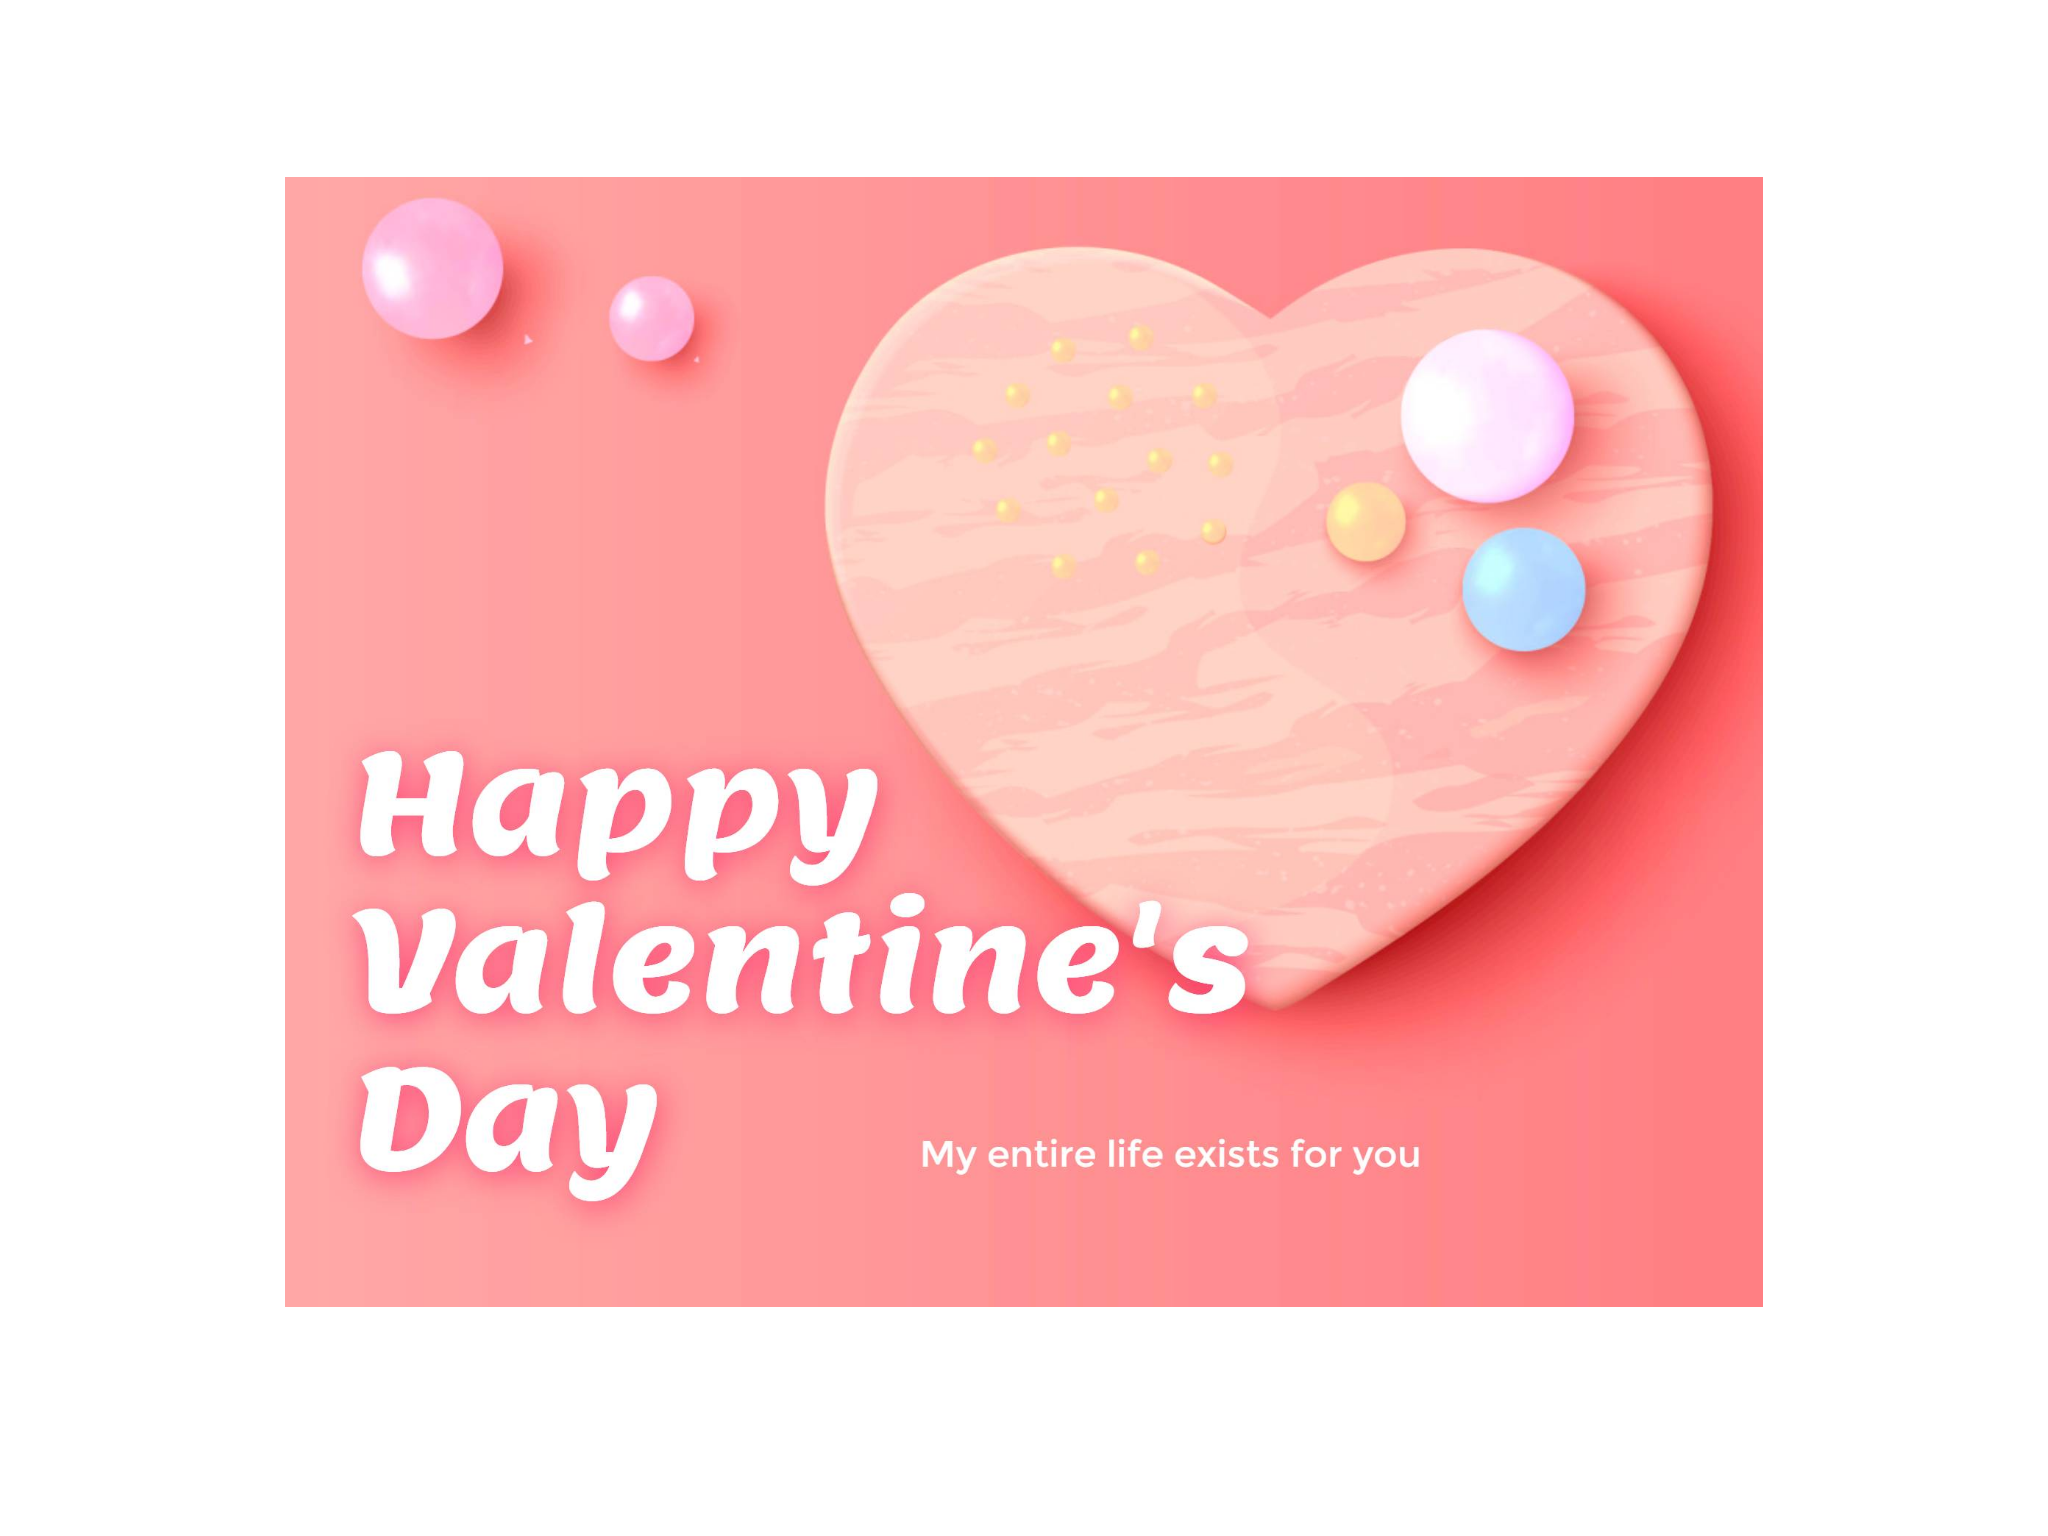 Creative & Romantic Valentine's Day Messages for Your Special Someone |  Fotor